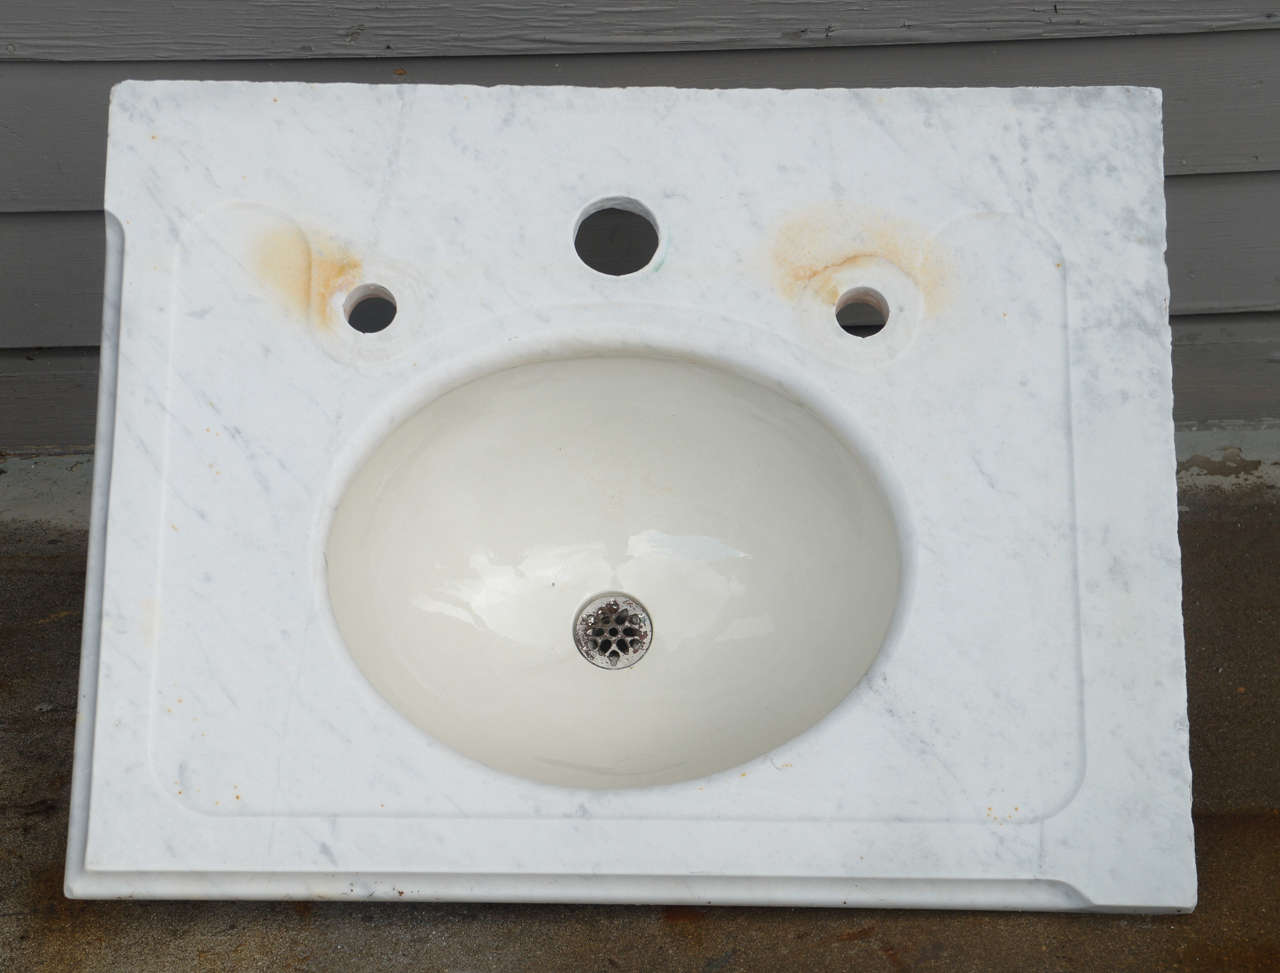 Antique marble vanity sink top with newly drilled holes to accommodate modern fixtures. Some rust stains.